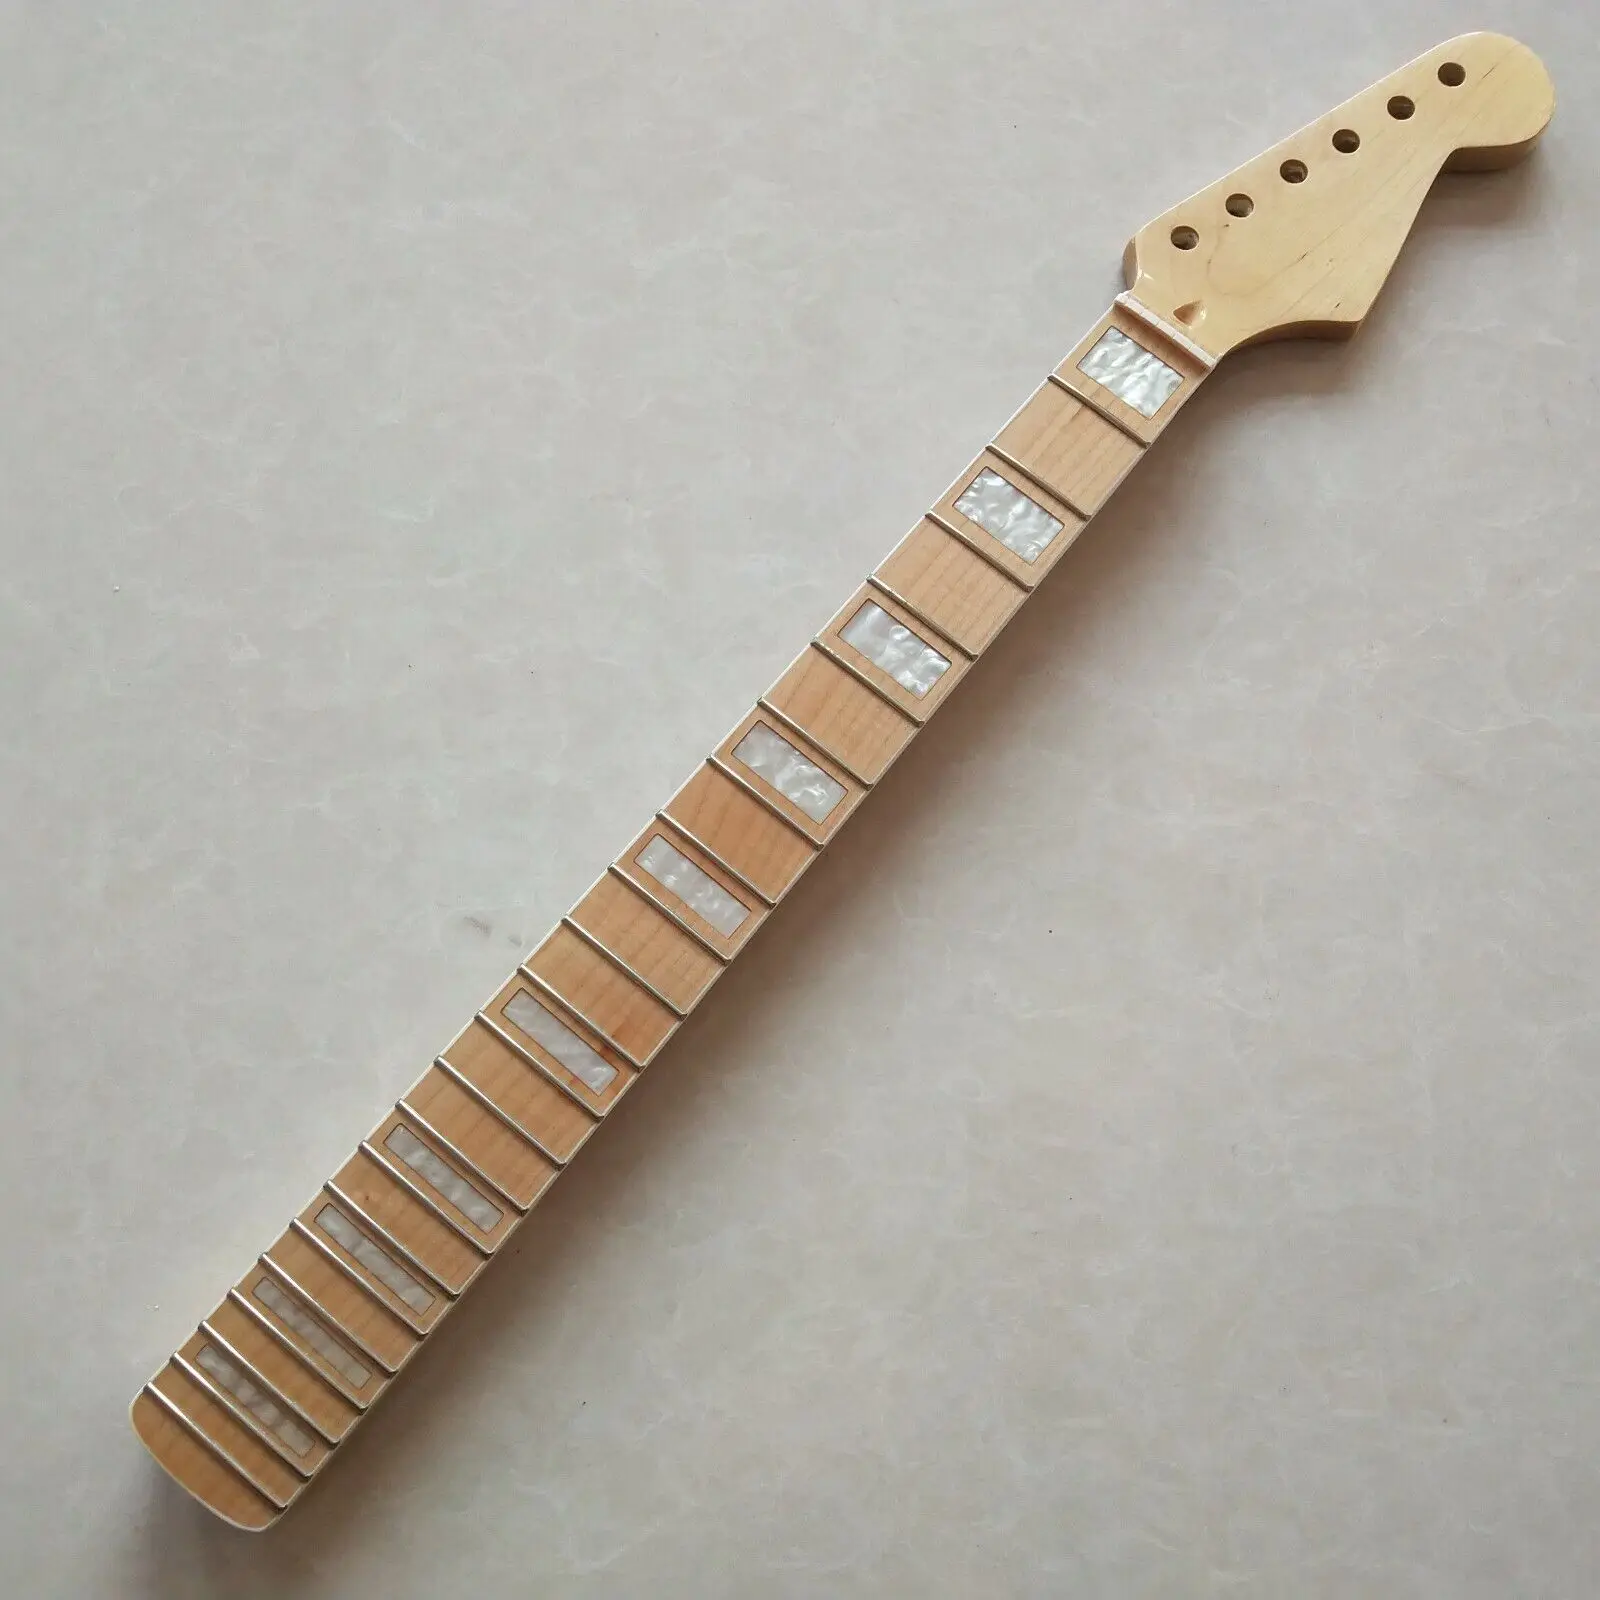 Maple Electric Guitar Neck Parts 22 fret 25.5inch Maple Fretboard Block Inlay enlarge